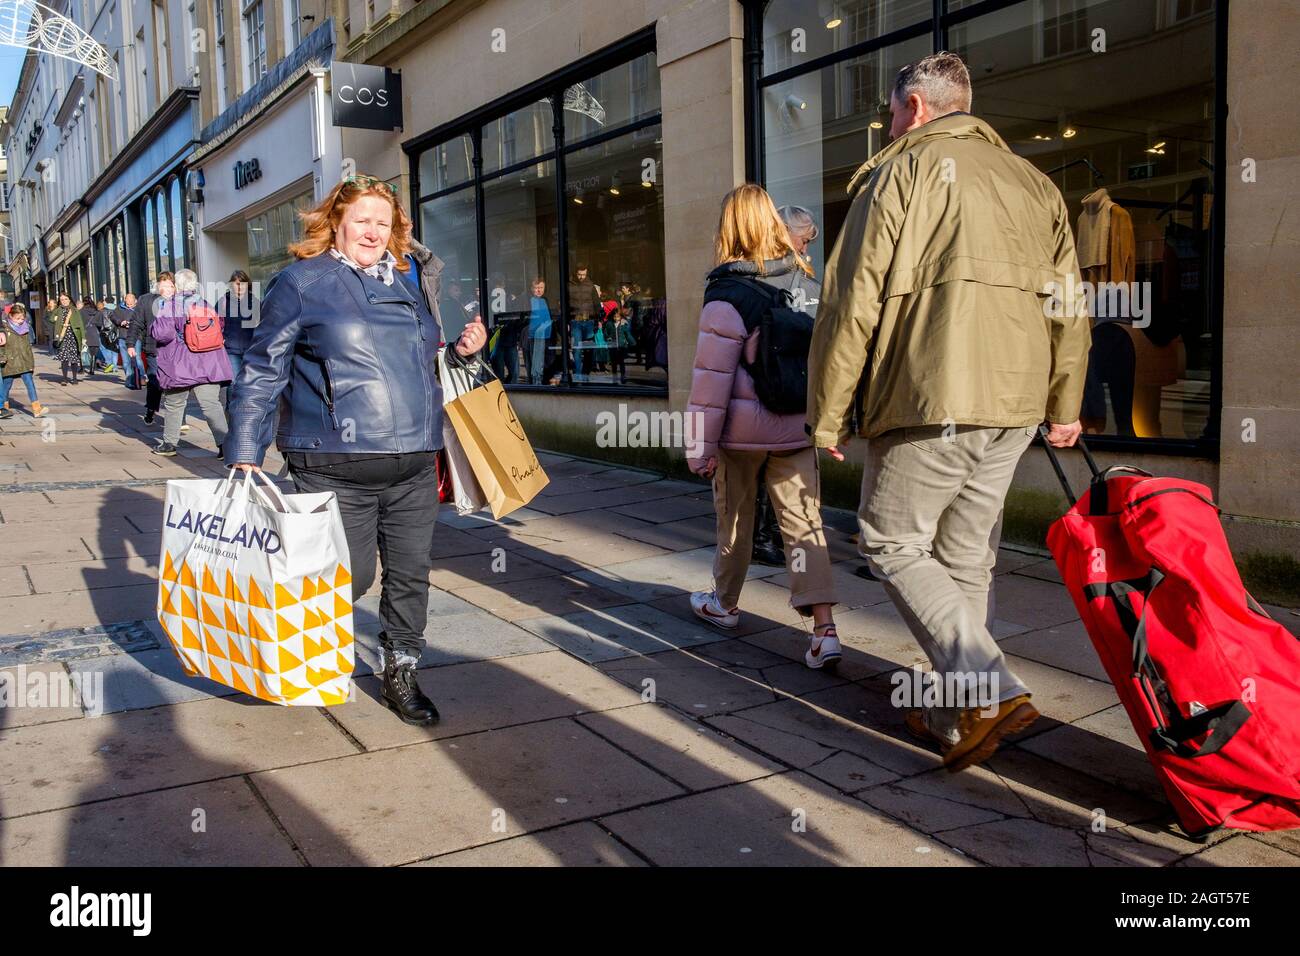 Bath, Somerset, UK. 21st December, 2019. Shoppers in Bath city centre are pictured as they visit the shops on the last Saturday before Christmas. The last Saturday before Christmas has become known as ‘Panic Saturday' and many stores have  reduced prices to attract last minute customers. Credit: Lynchpics/Alamy Live News Stock Photo